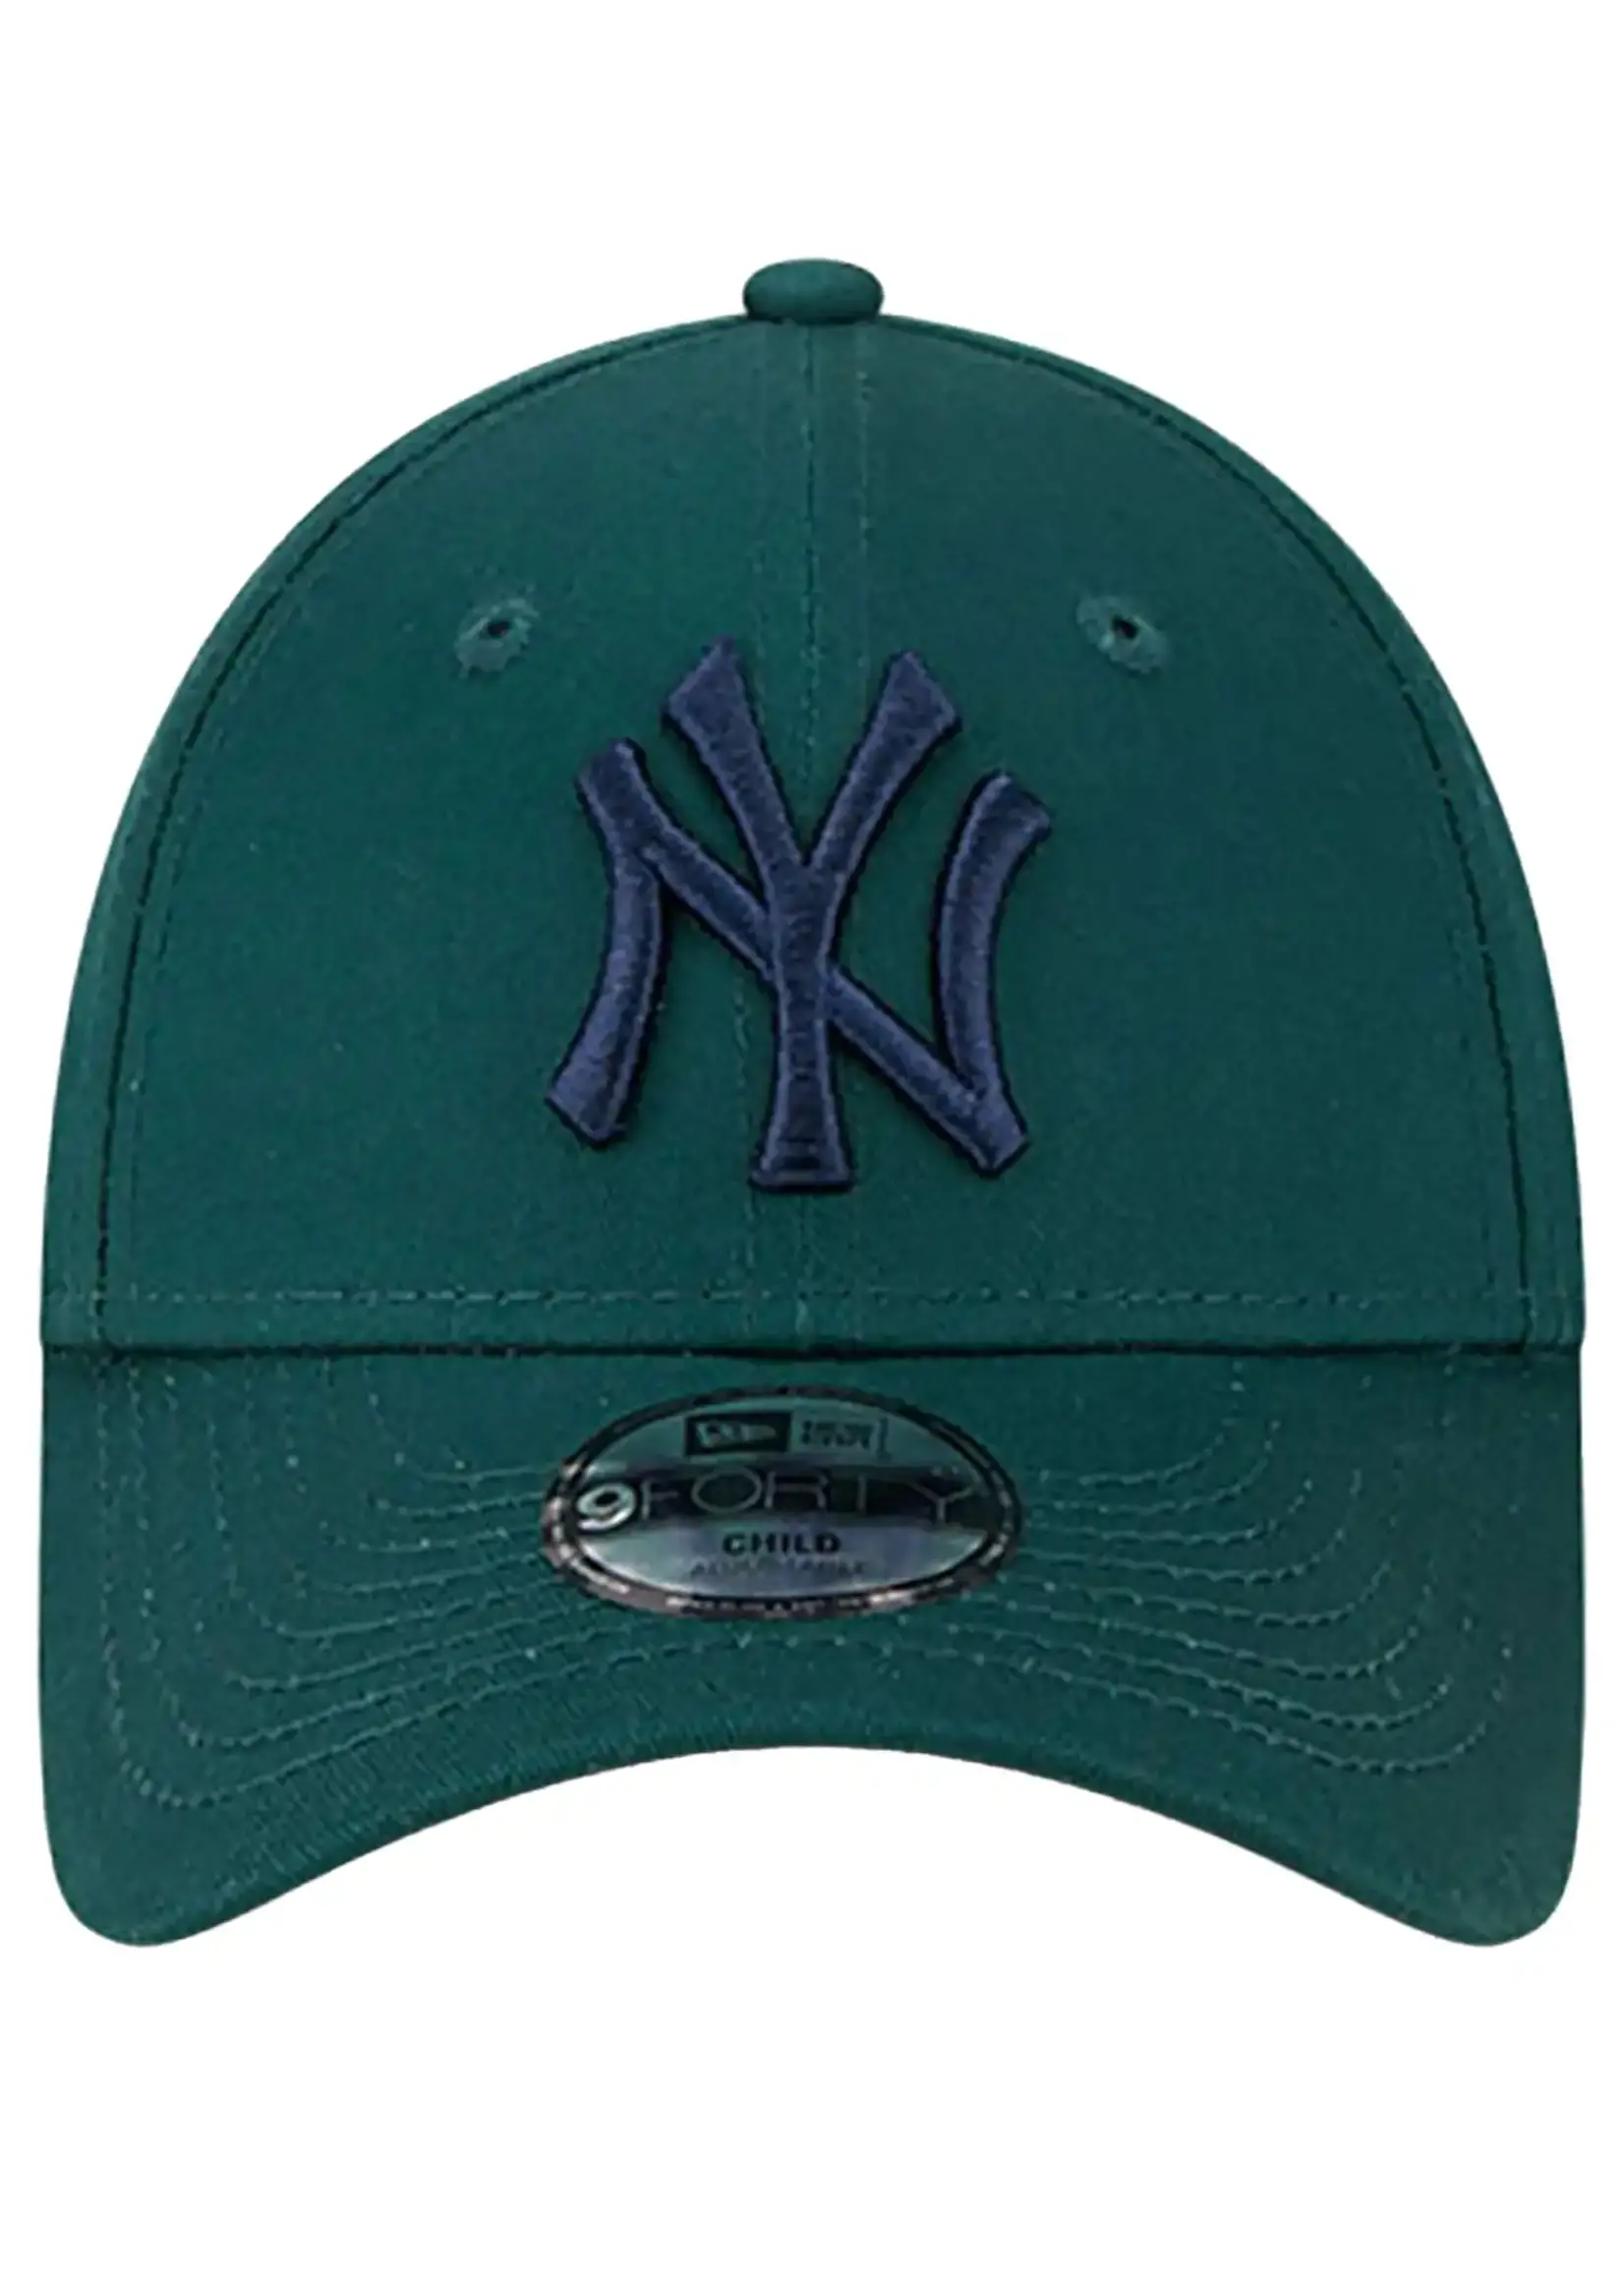 New Era New York Yankees  9Forty Youth Cap Green Navy